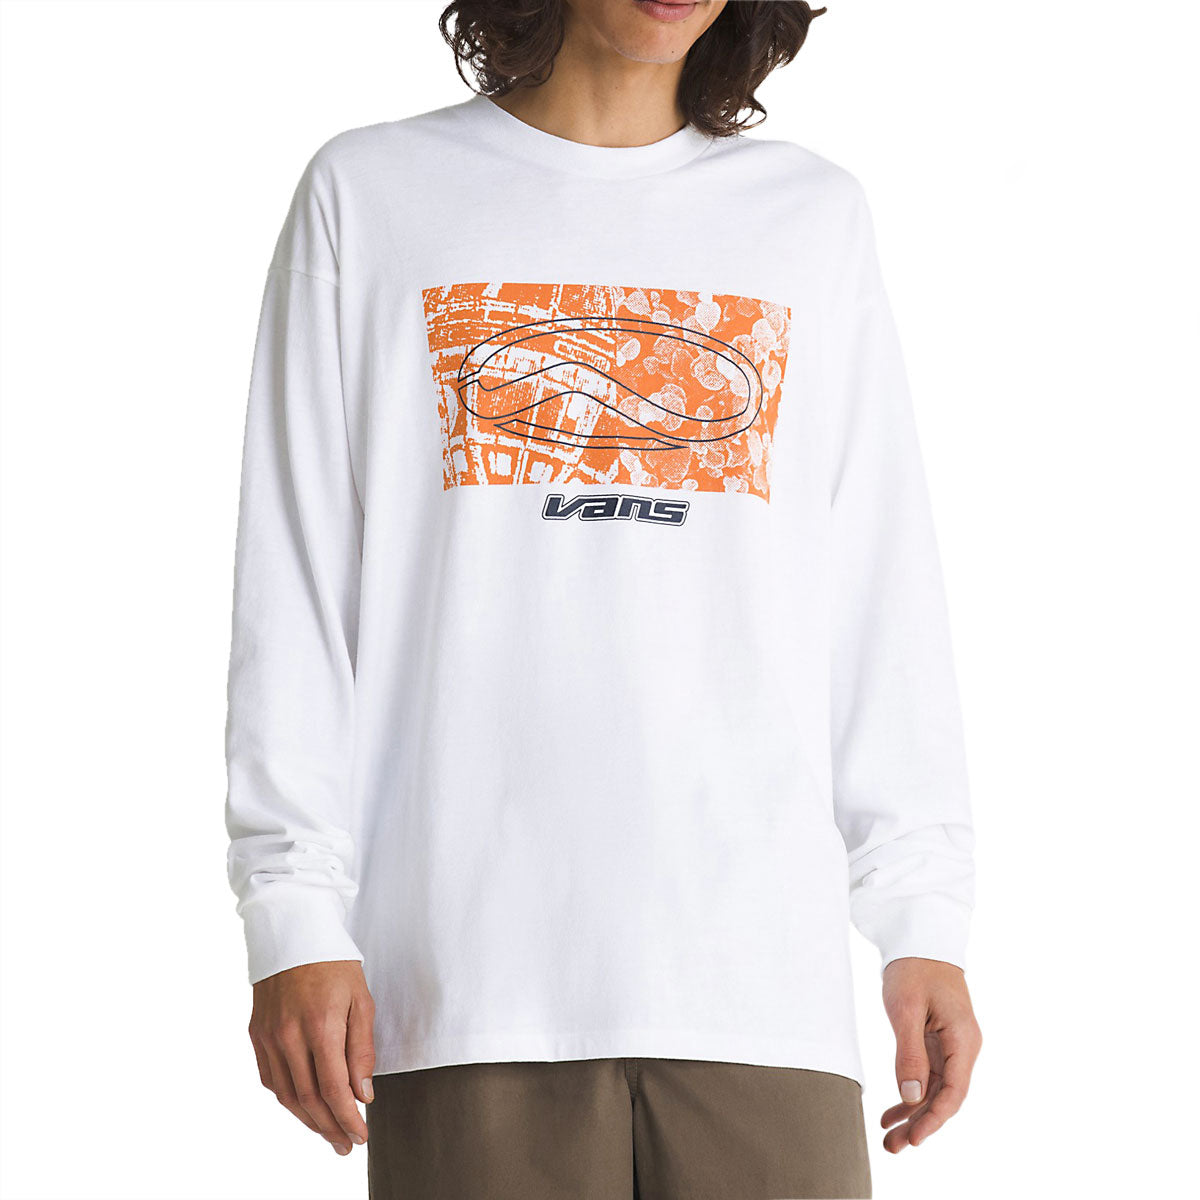 Vans Off The Wall II Loose Skate Classics Long Sleeve T-Shirt - White image 2